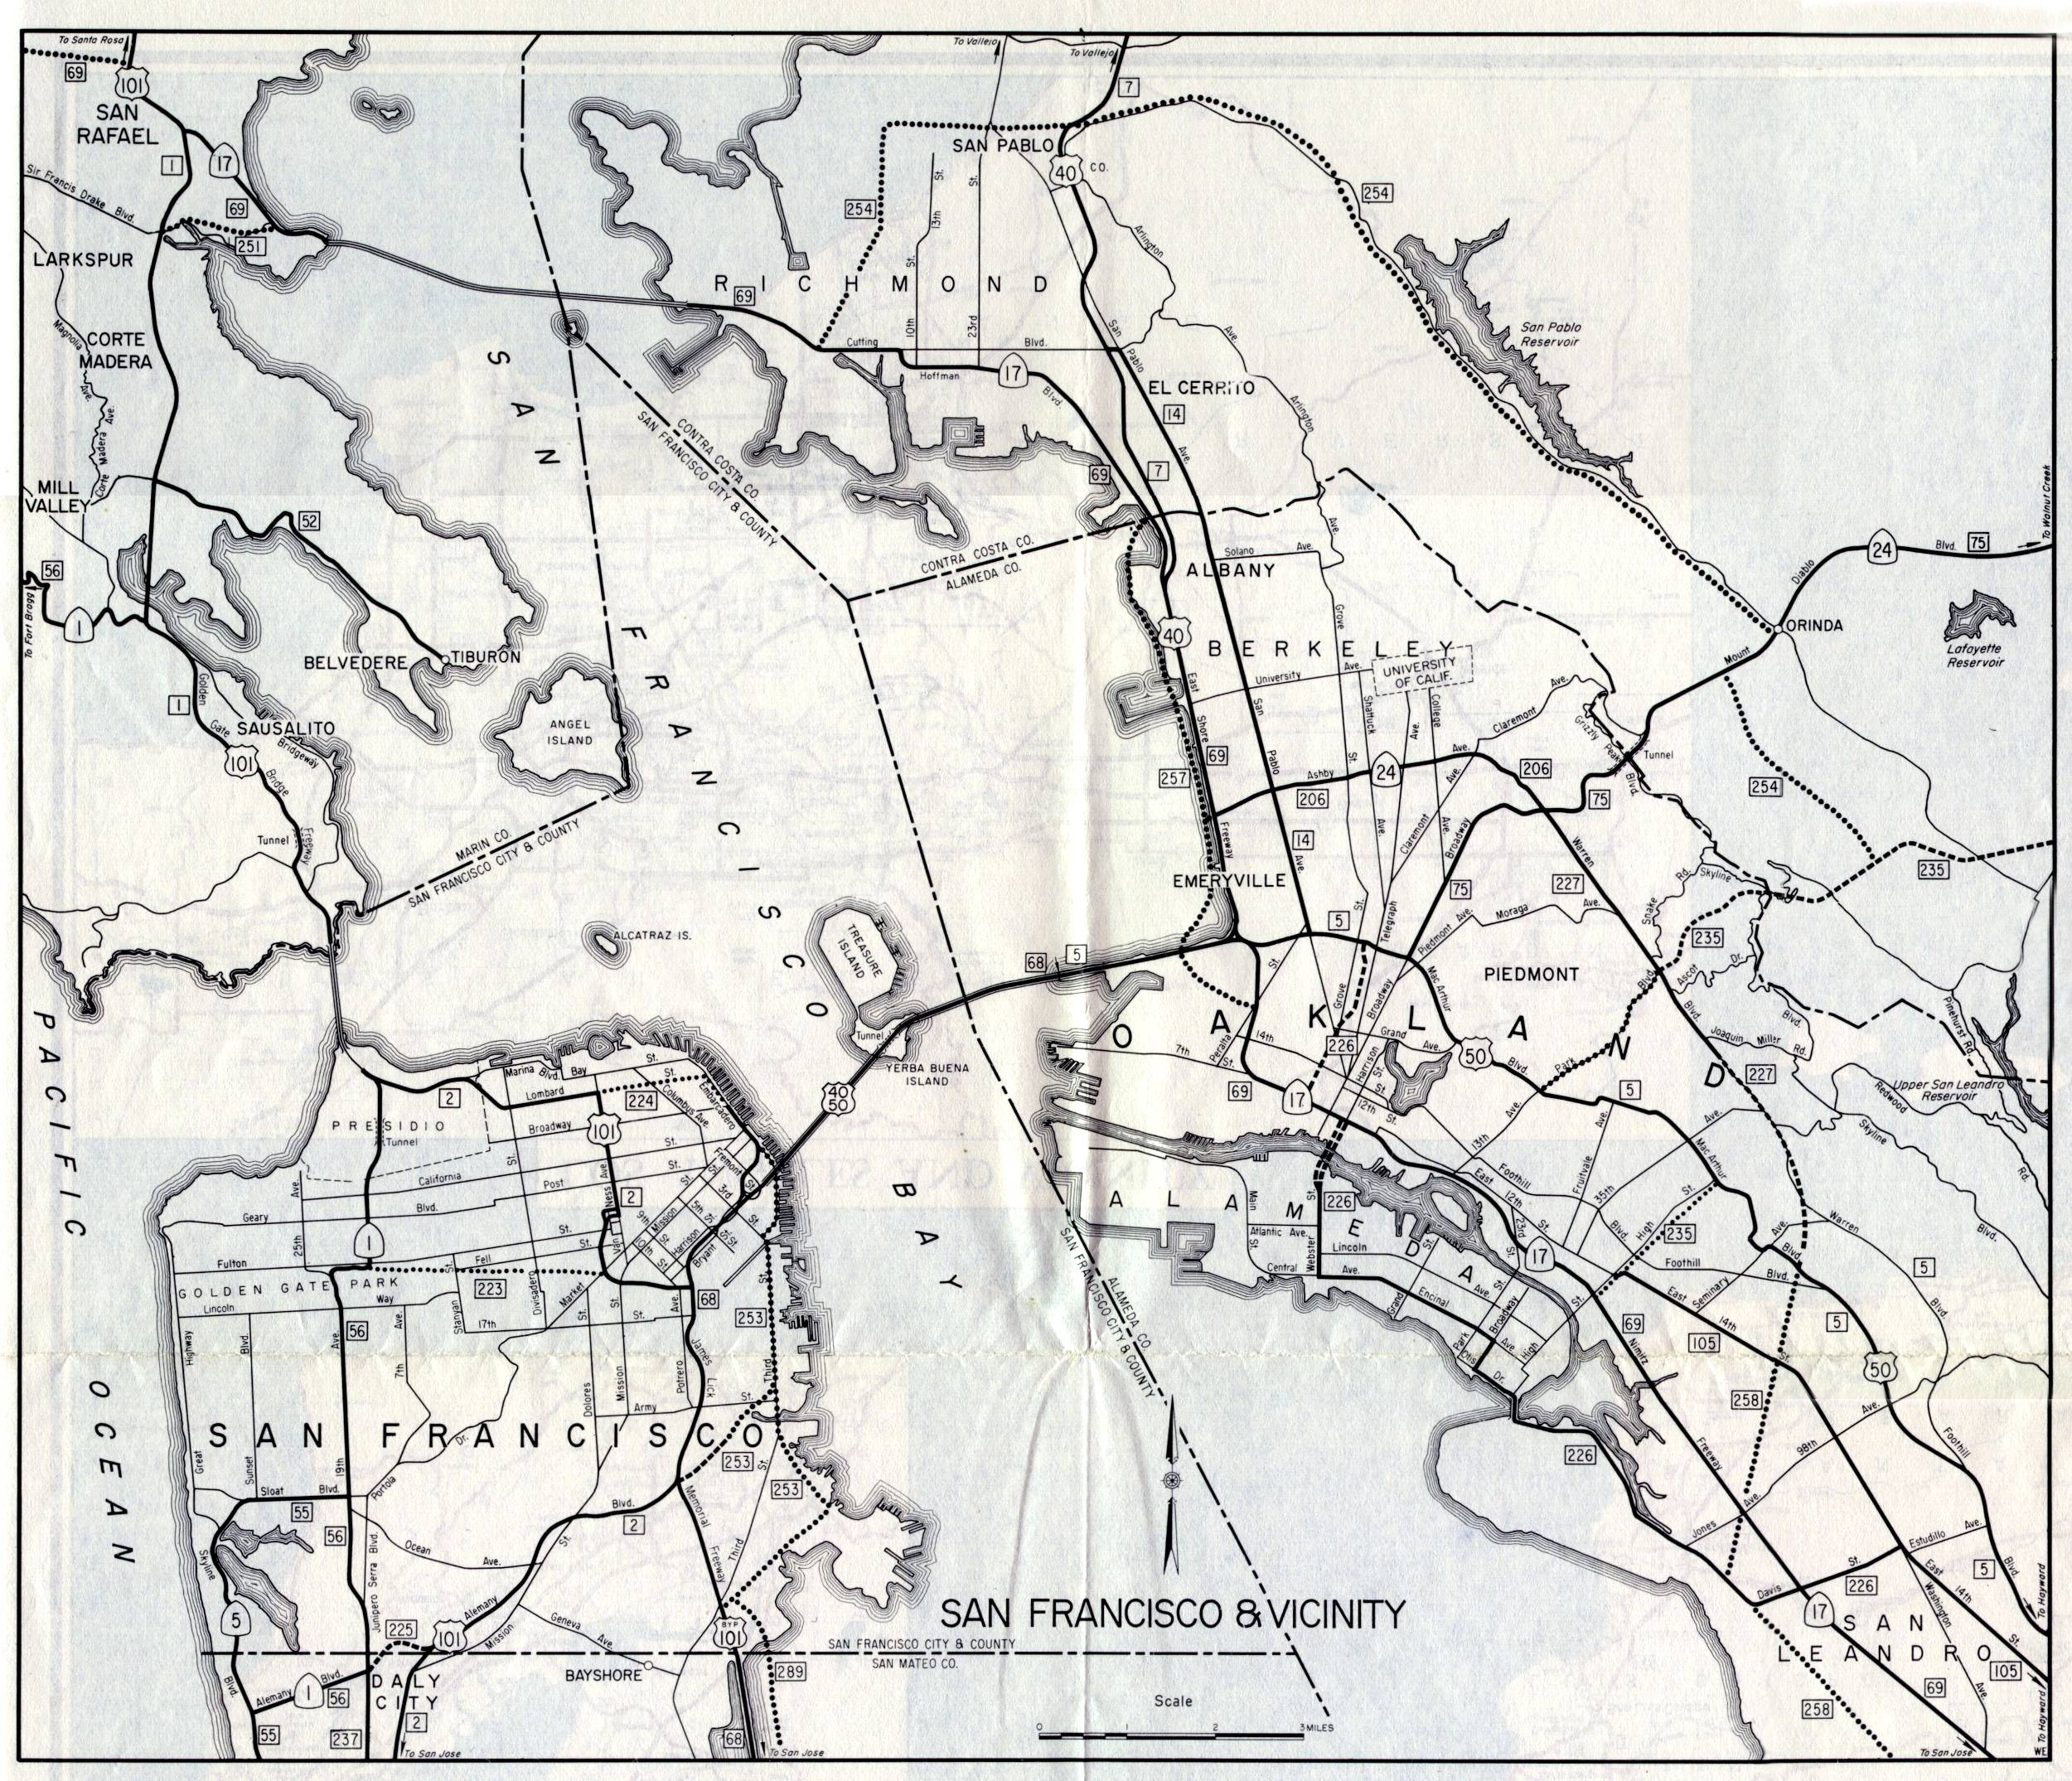 Detail map for the San Francisco Bay Area on the 1961 California official highway map